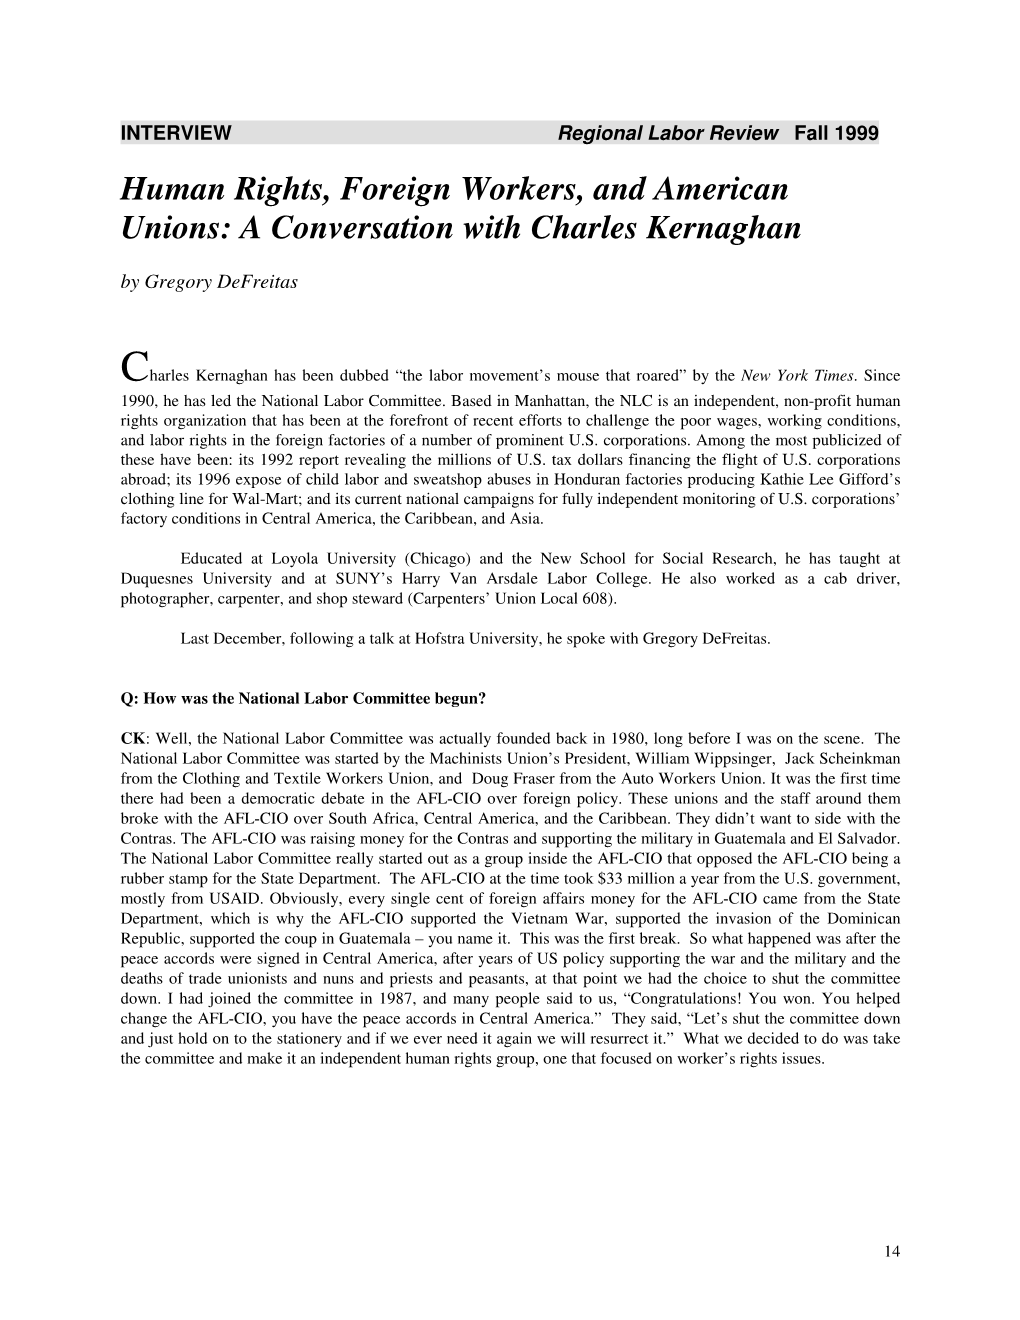 Human Rights, Foreign Workers, and American Unions: a Conversation with Charles Kernaghan by Gregory Defreitas